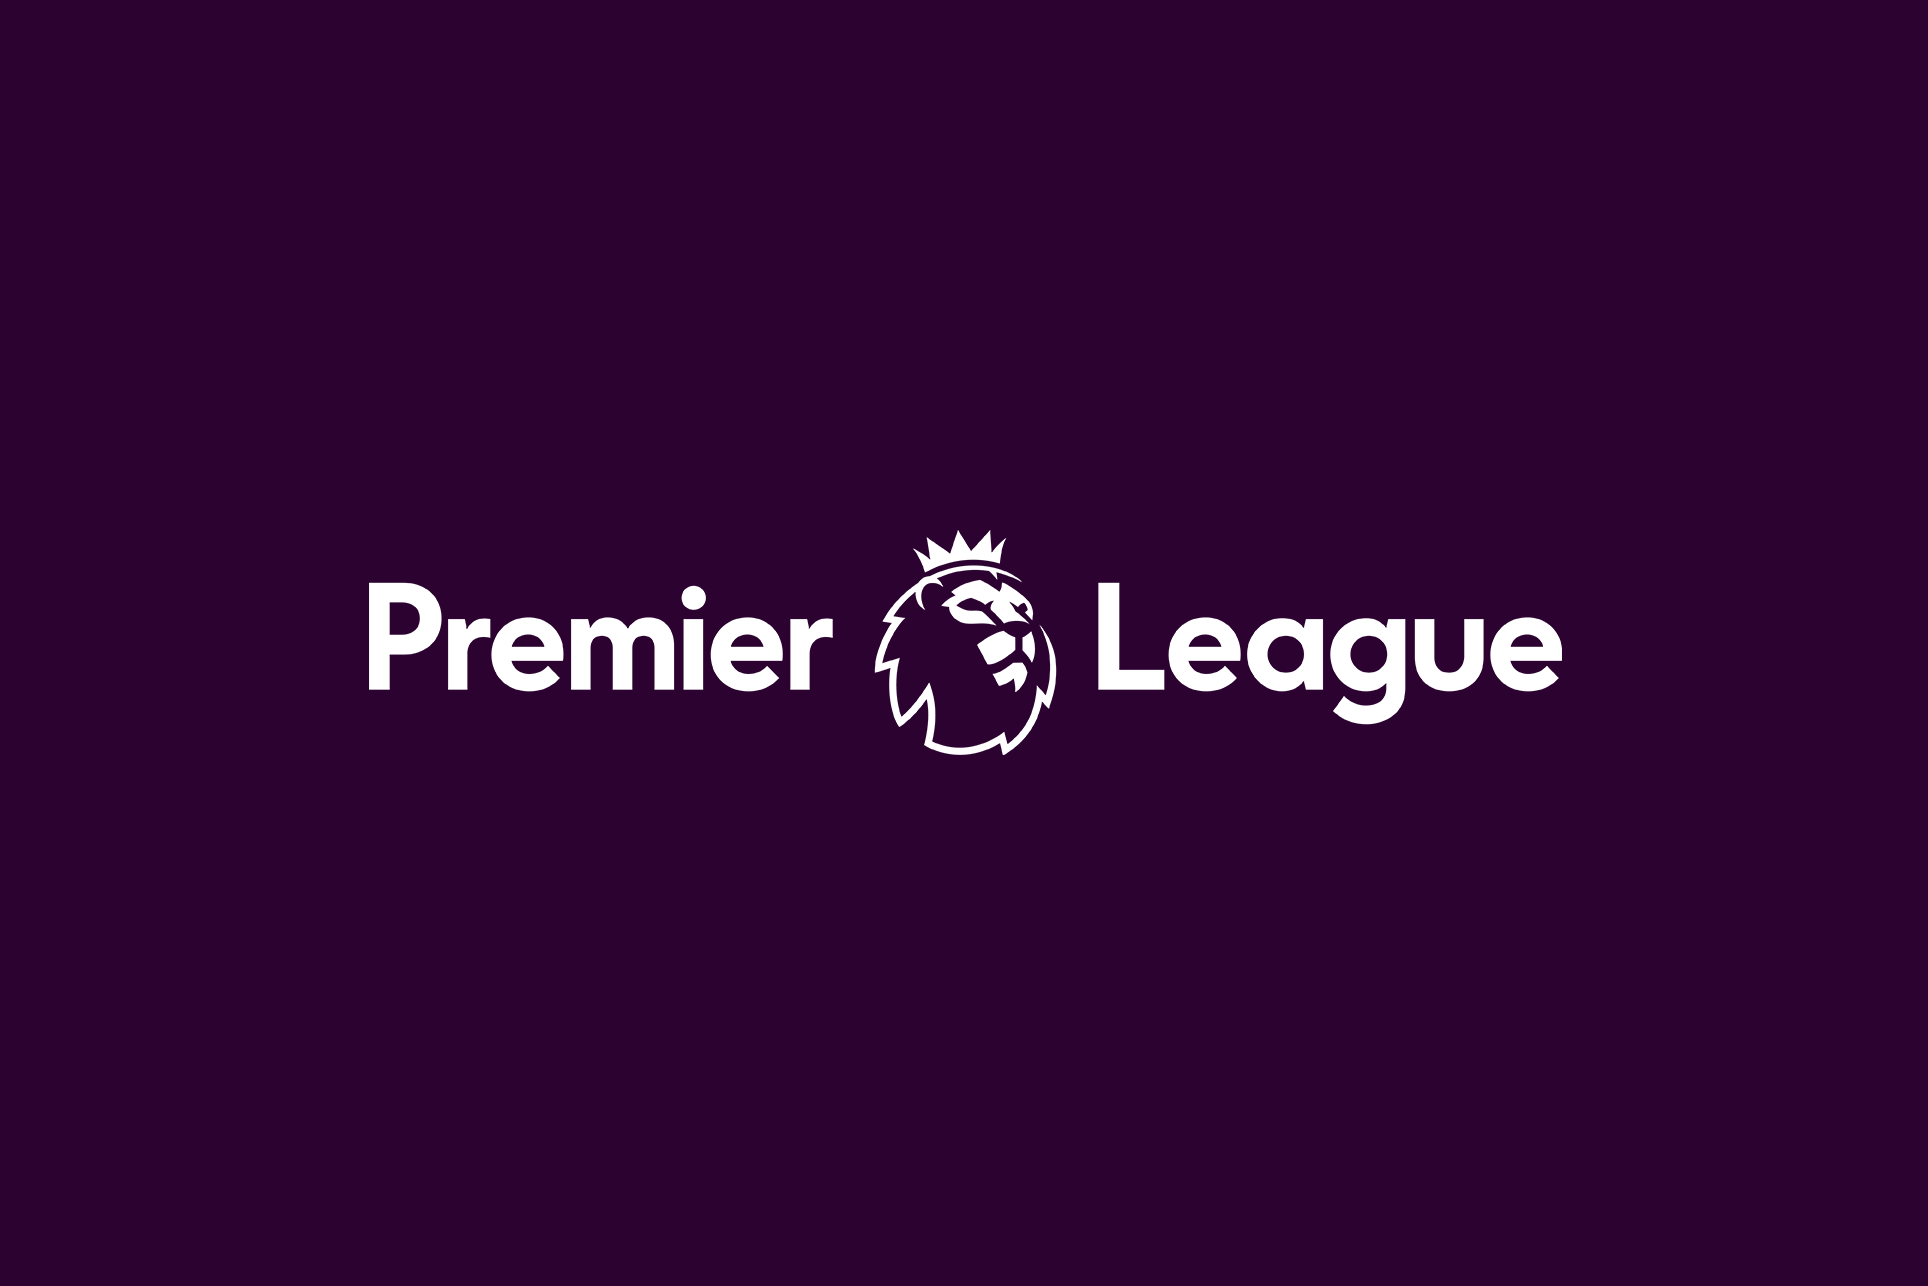 New Premier League season reportedly close to being finalised | English Premier League